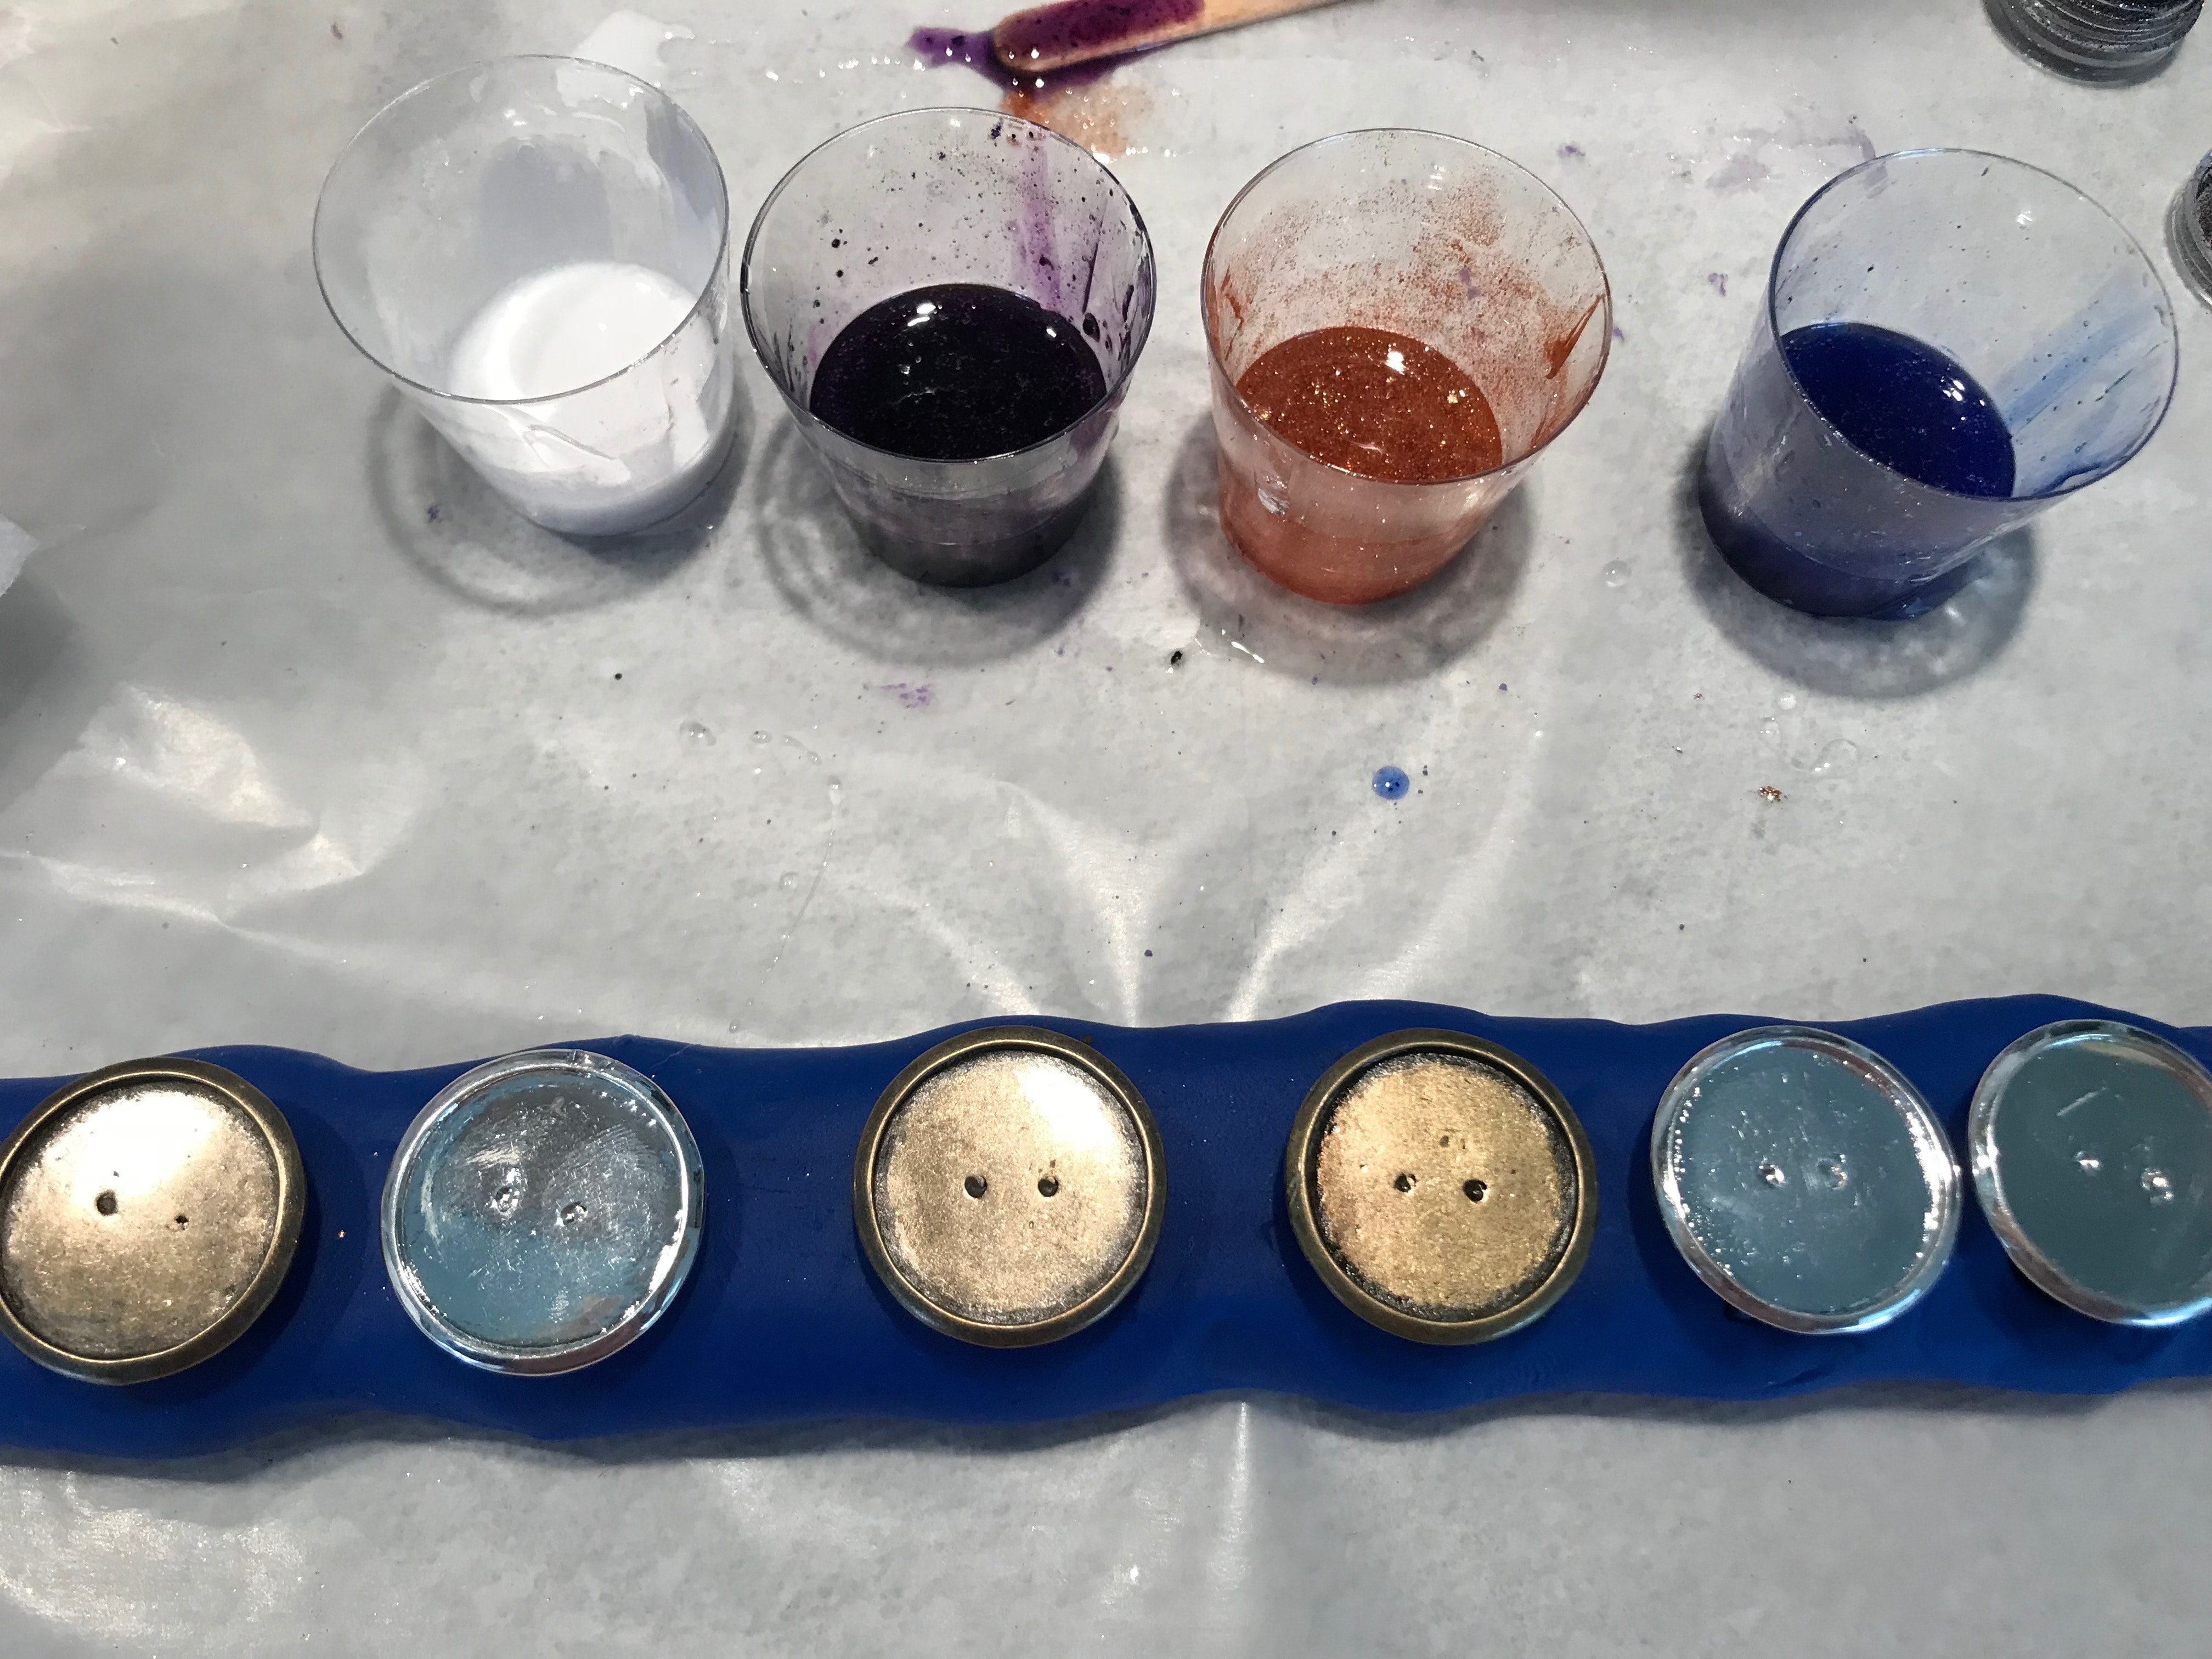 Pearl. deep purple, bronze, and deep blue cups of mixed resin in back, rings ready to fill in front